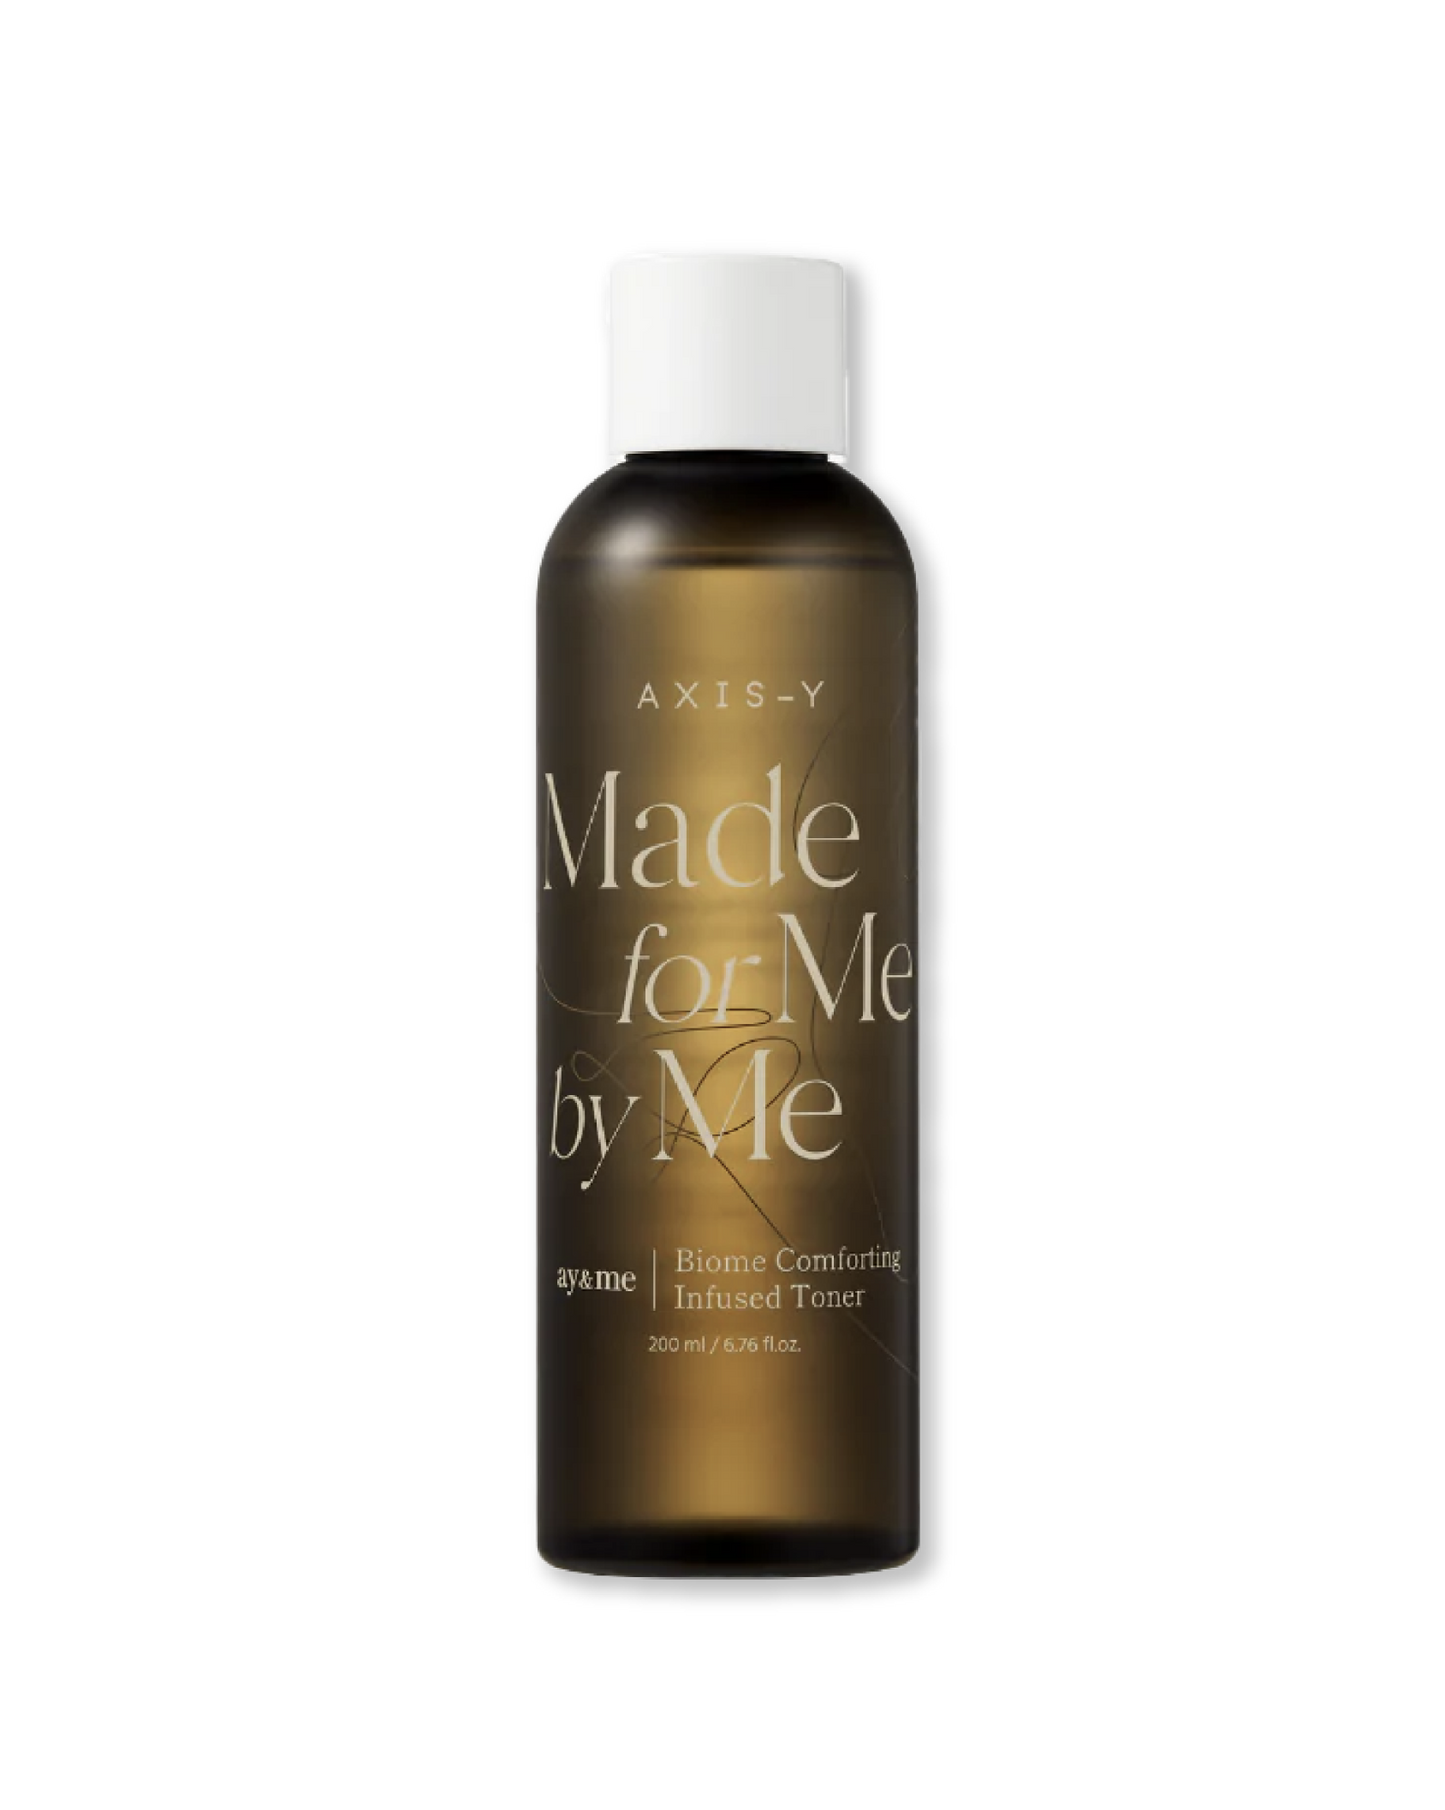 AXIS-Y Biome Comforting Infused Toner